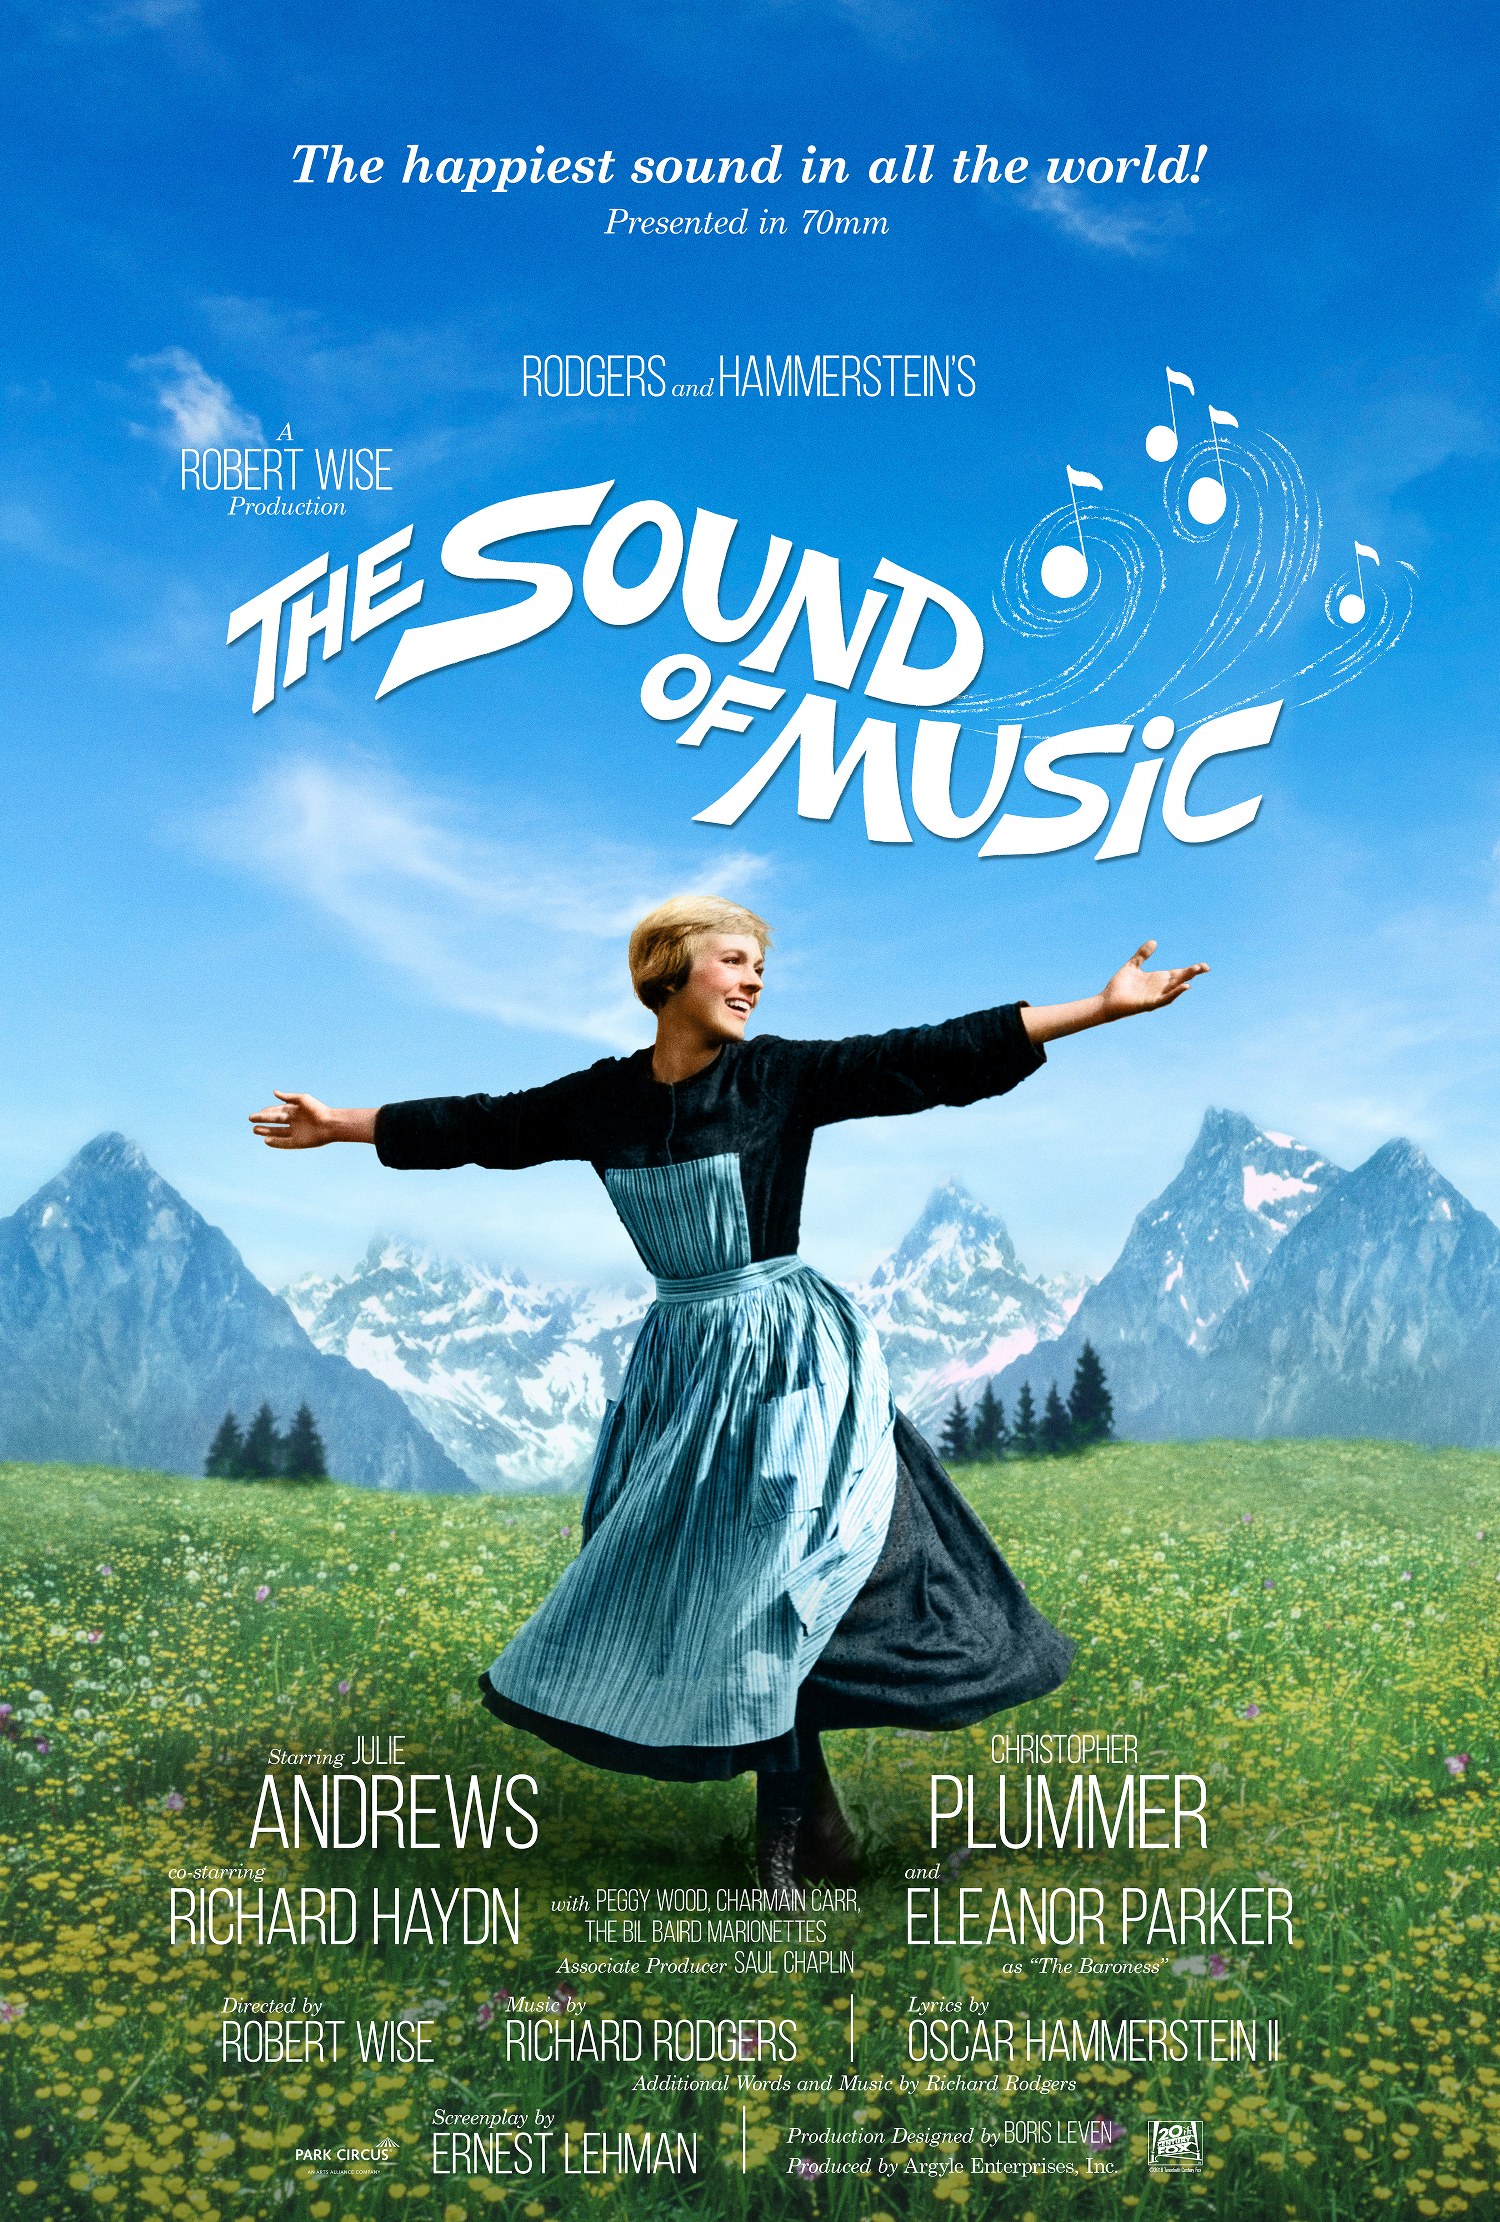 sound-of-music-1-sheet-70mm-emailable-confusions-and-connections